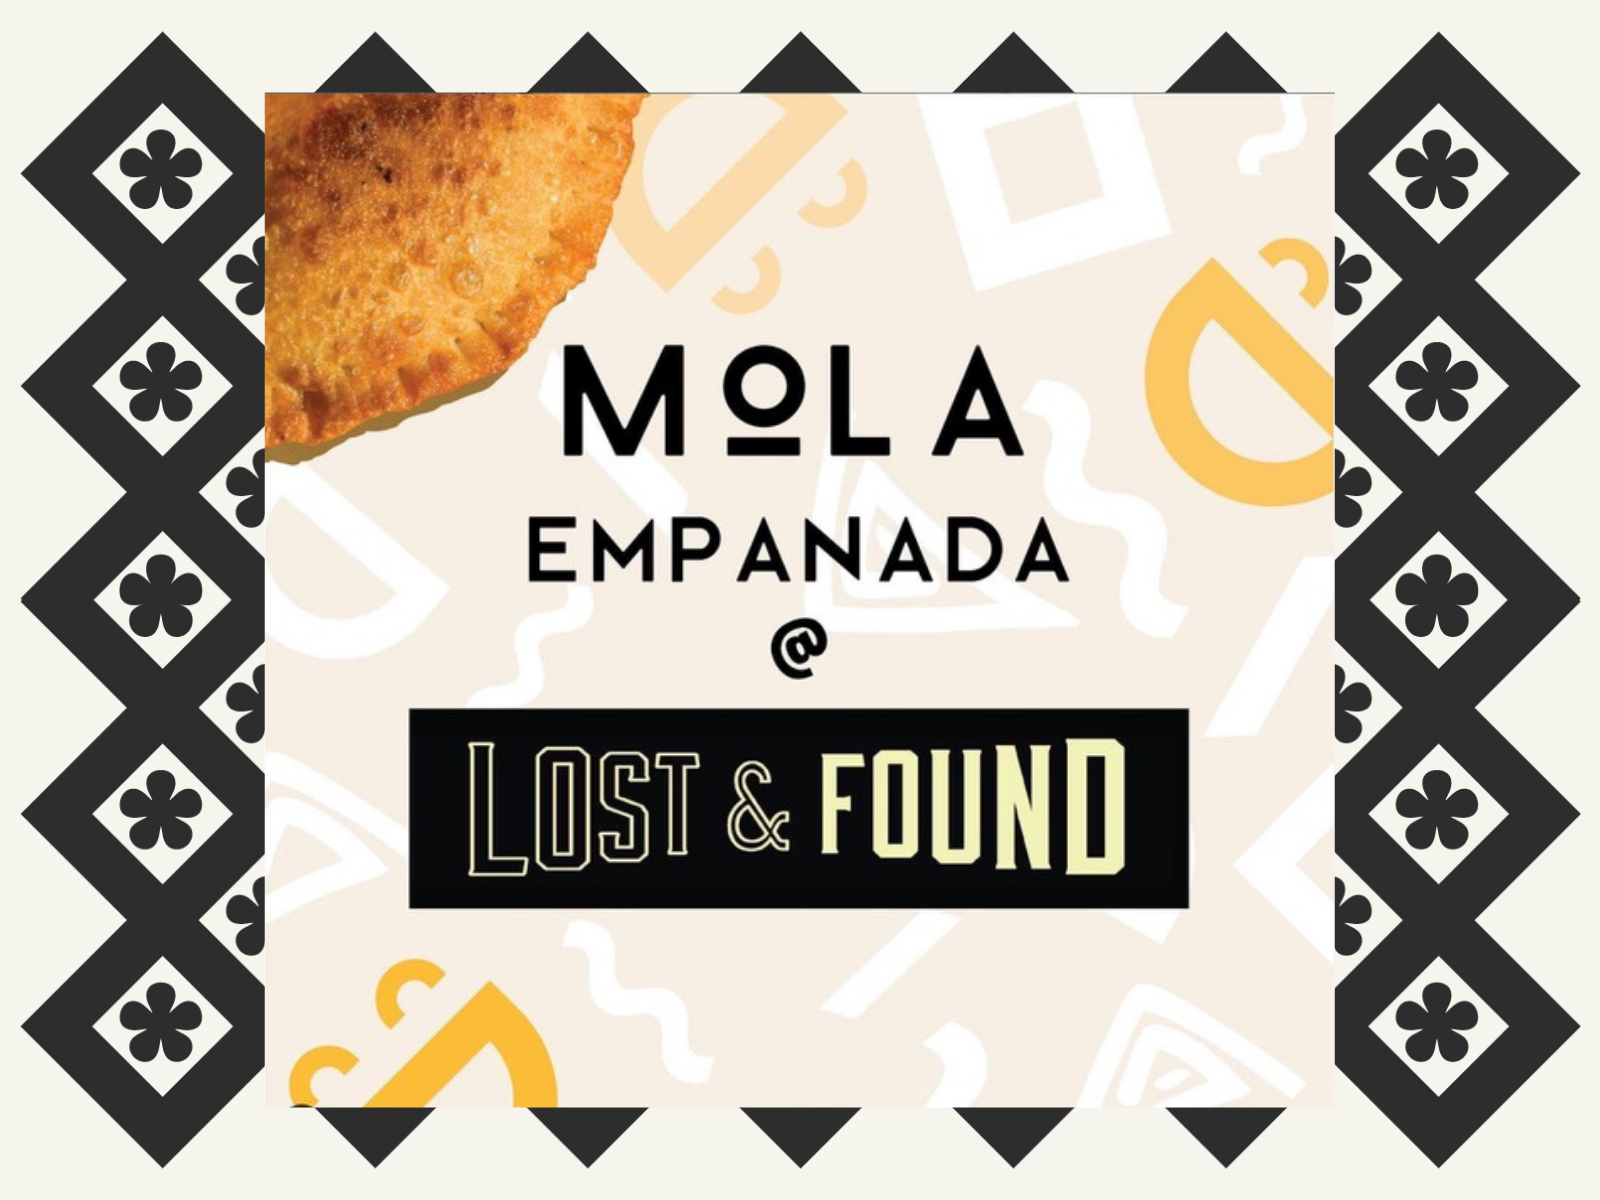 Main image for offer titled Monday Funday Popup: Mola Empanada + Lost & Found